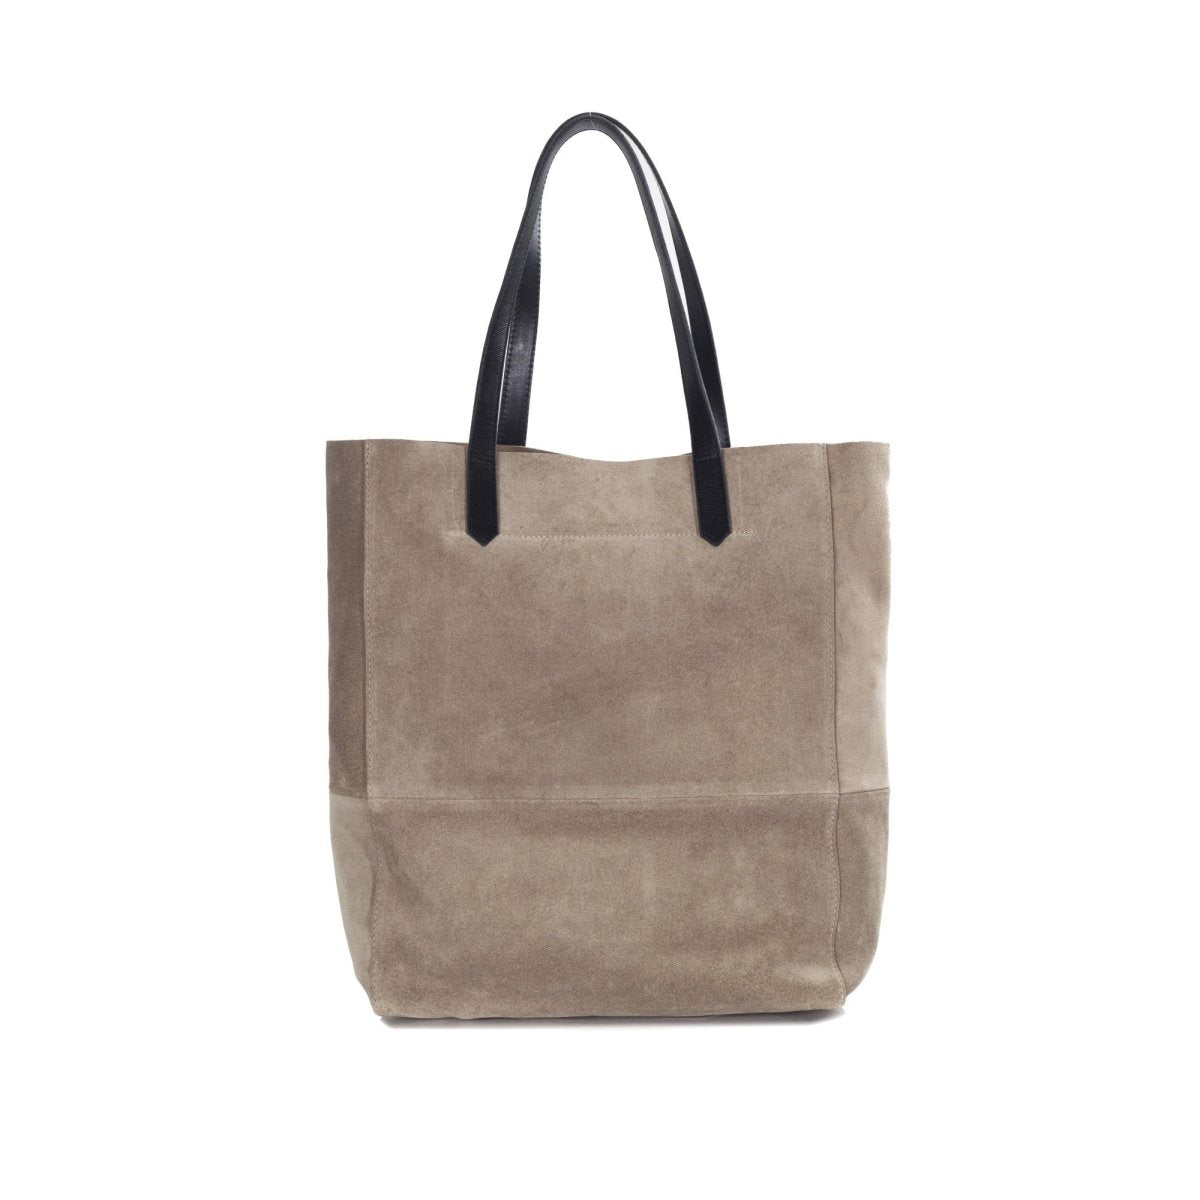 Shabby Suede Leather Tote Handbag - Ozzell London